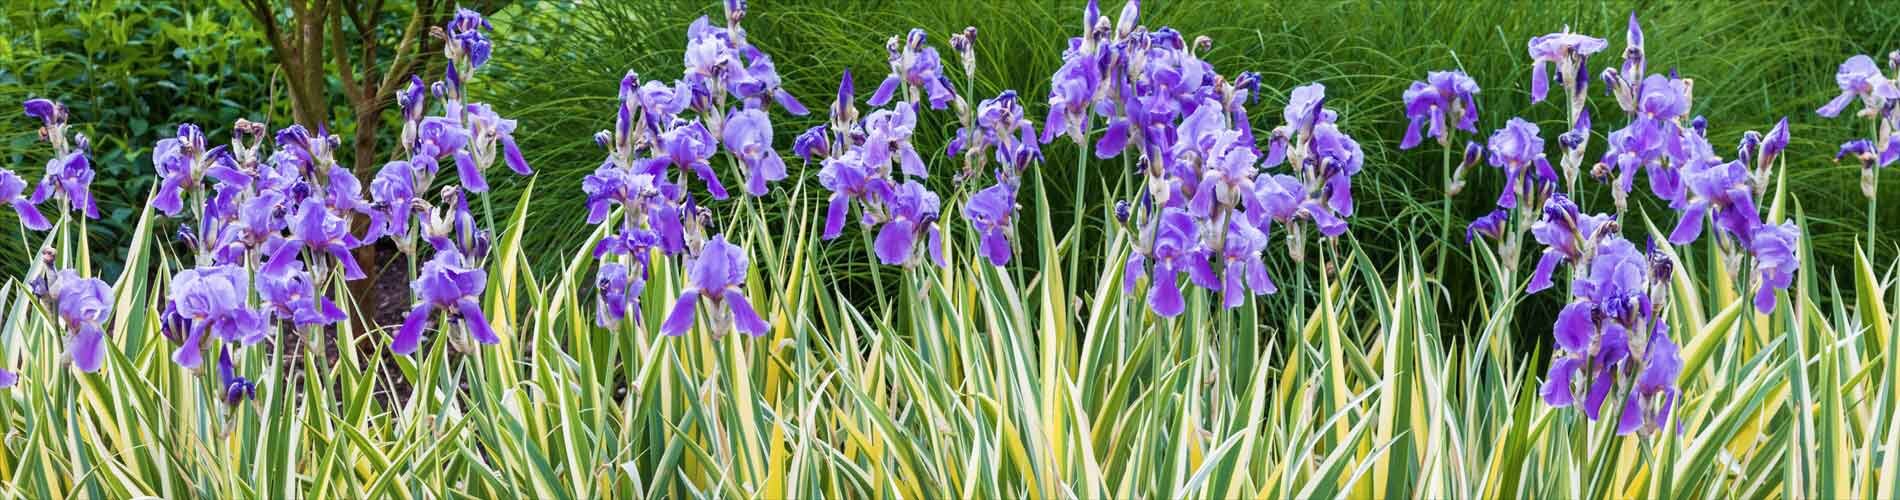 A field of Irises blowing in the wind.